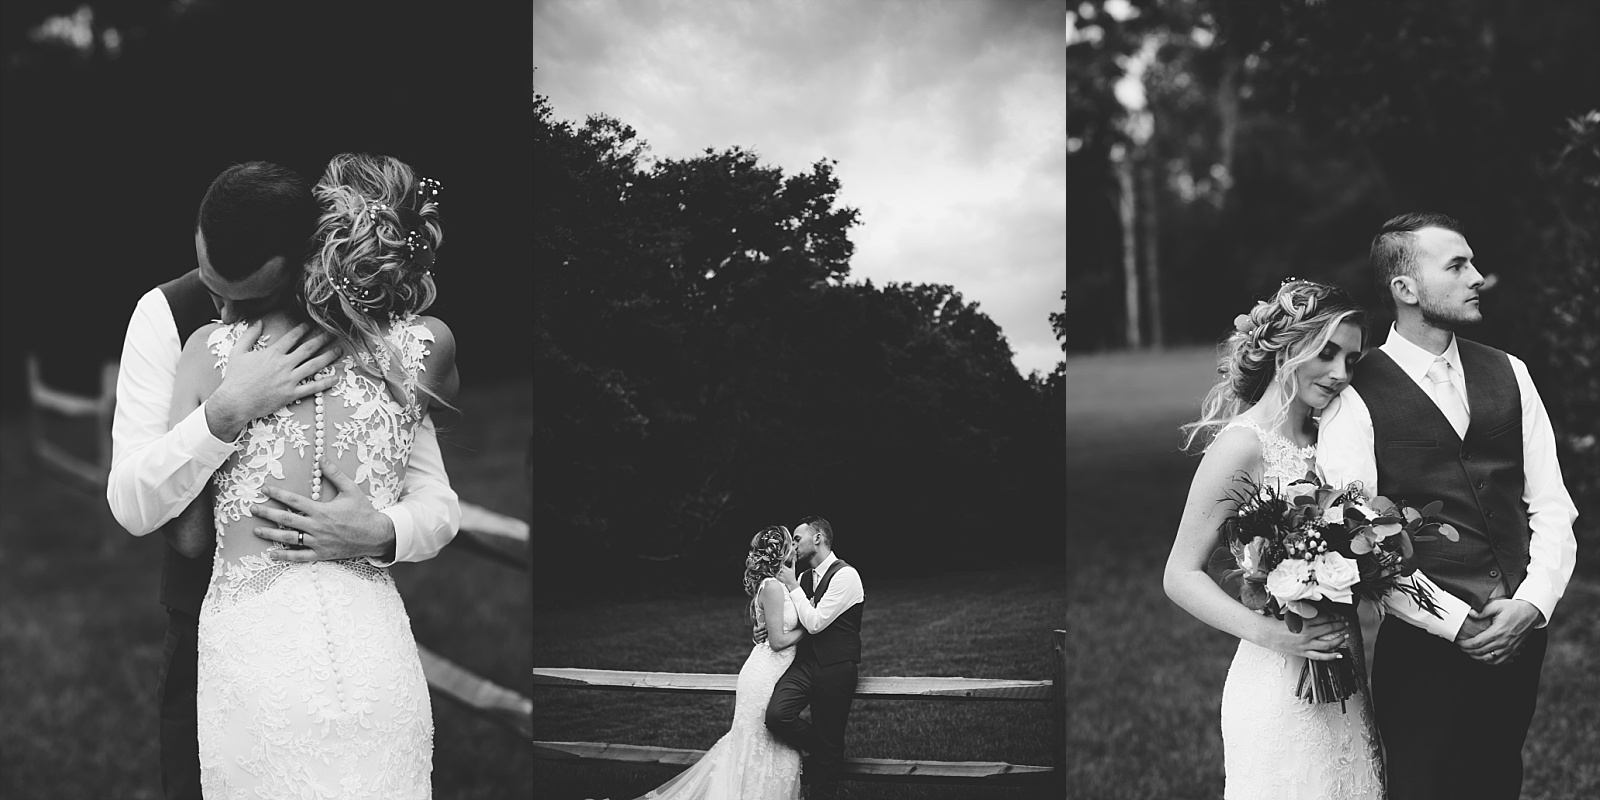 Intimate black and white photos of the bride and groom on their wedding day.